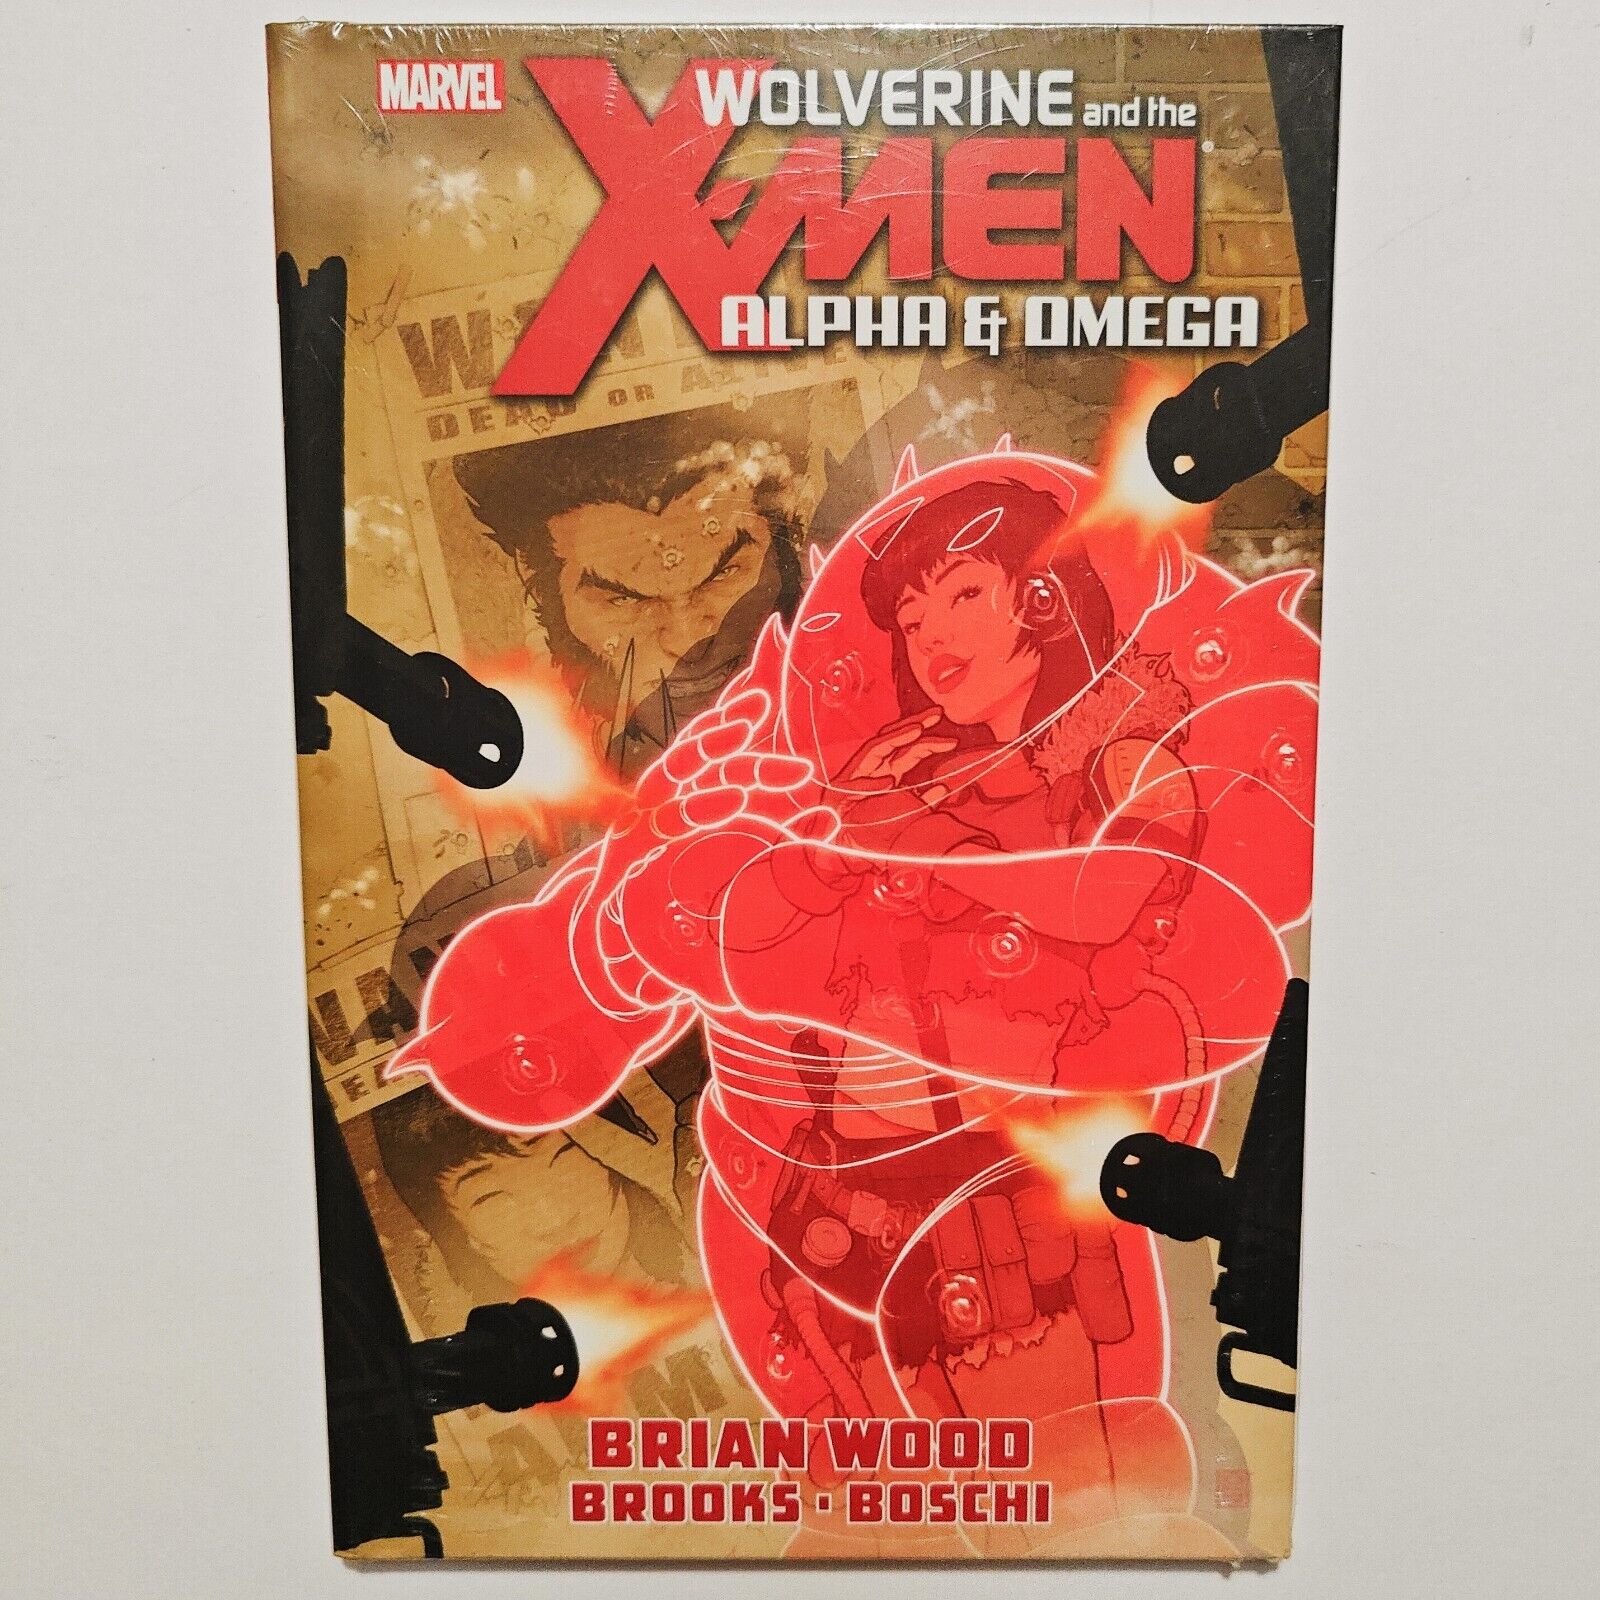 Wolverine And The X-Men: Alpha & Omega Premium (Hardcover) HC - NEW SEALED